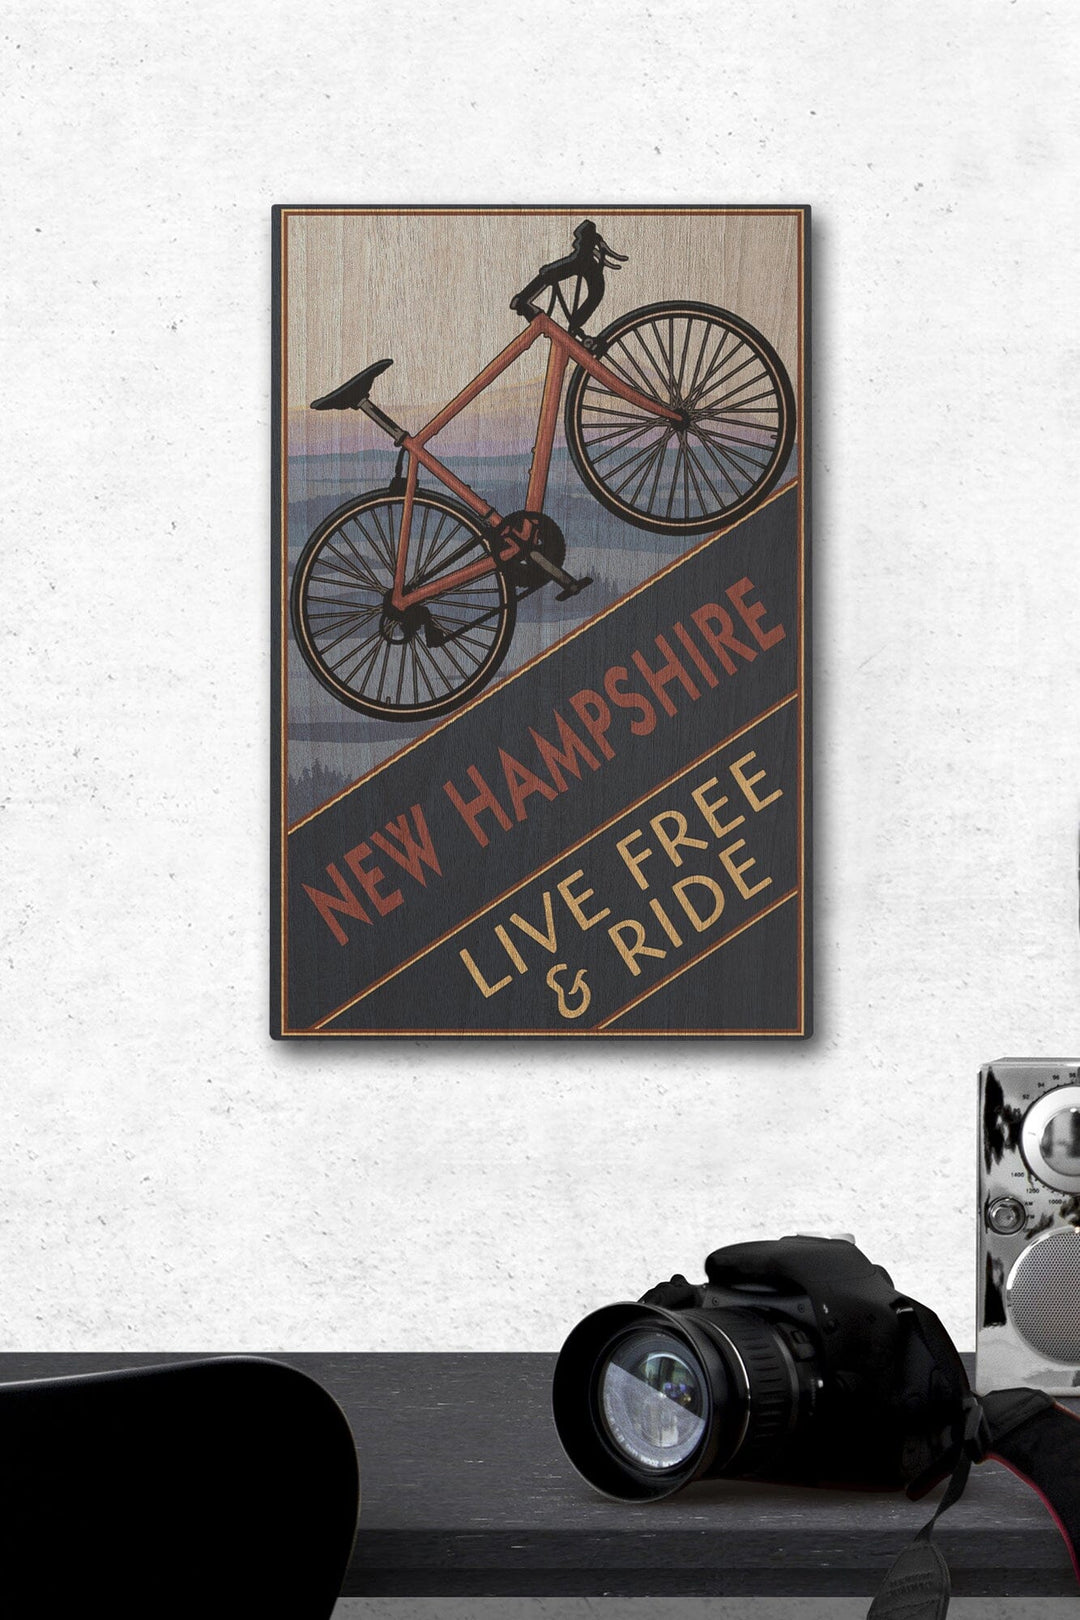 New Hampshire, Live Free and Ride, Mountain Bike, Lantern Press Poster, Wood Signs and Postcards Wood Lantern Press 12 x 18 Wood Gallery Print 